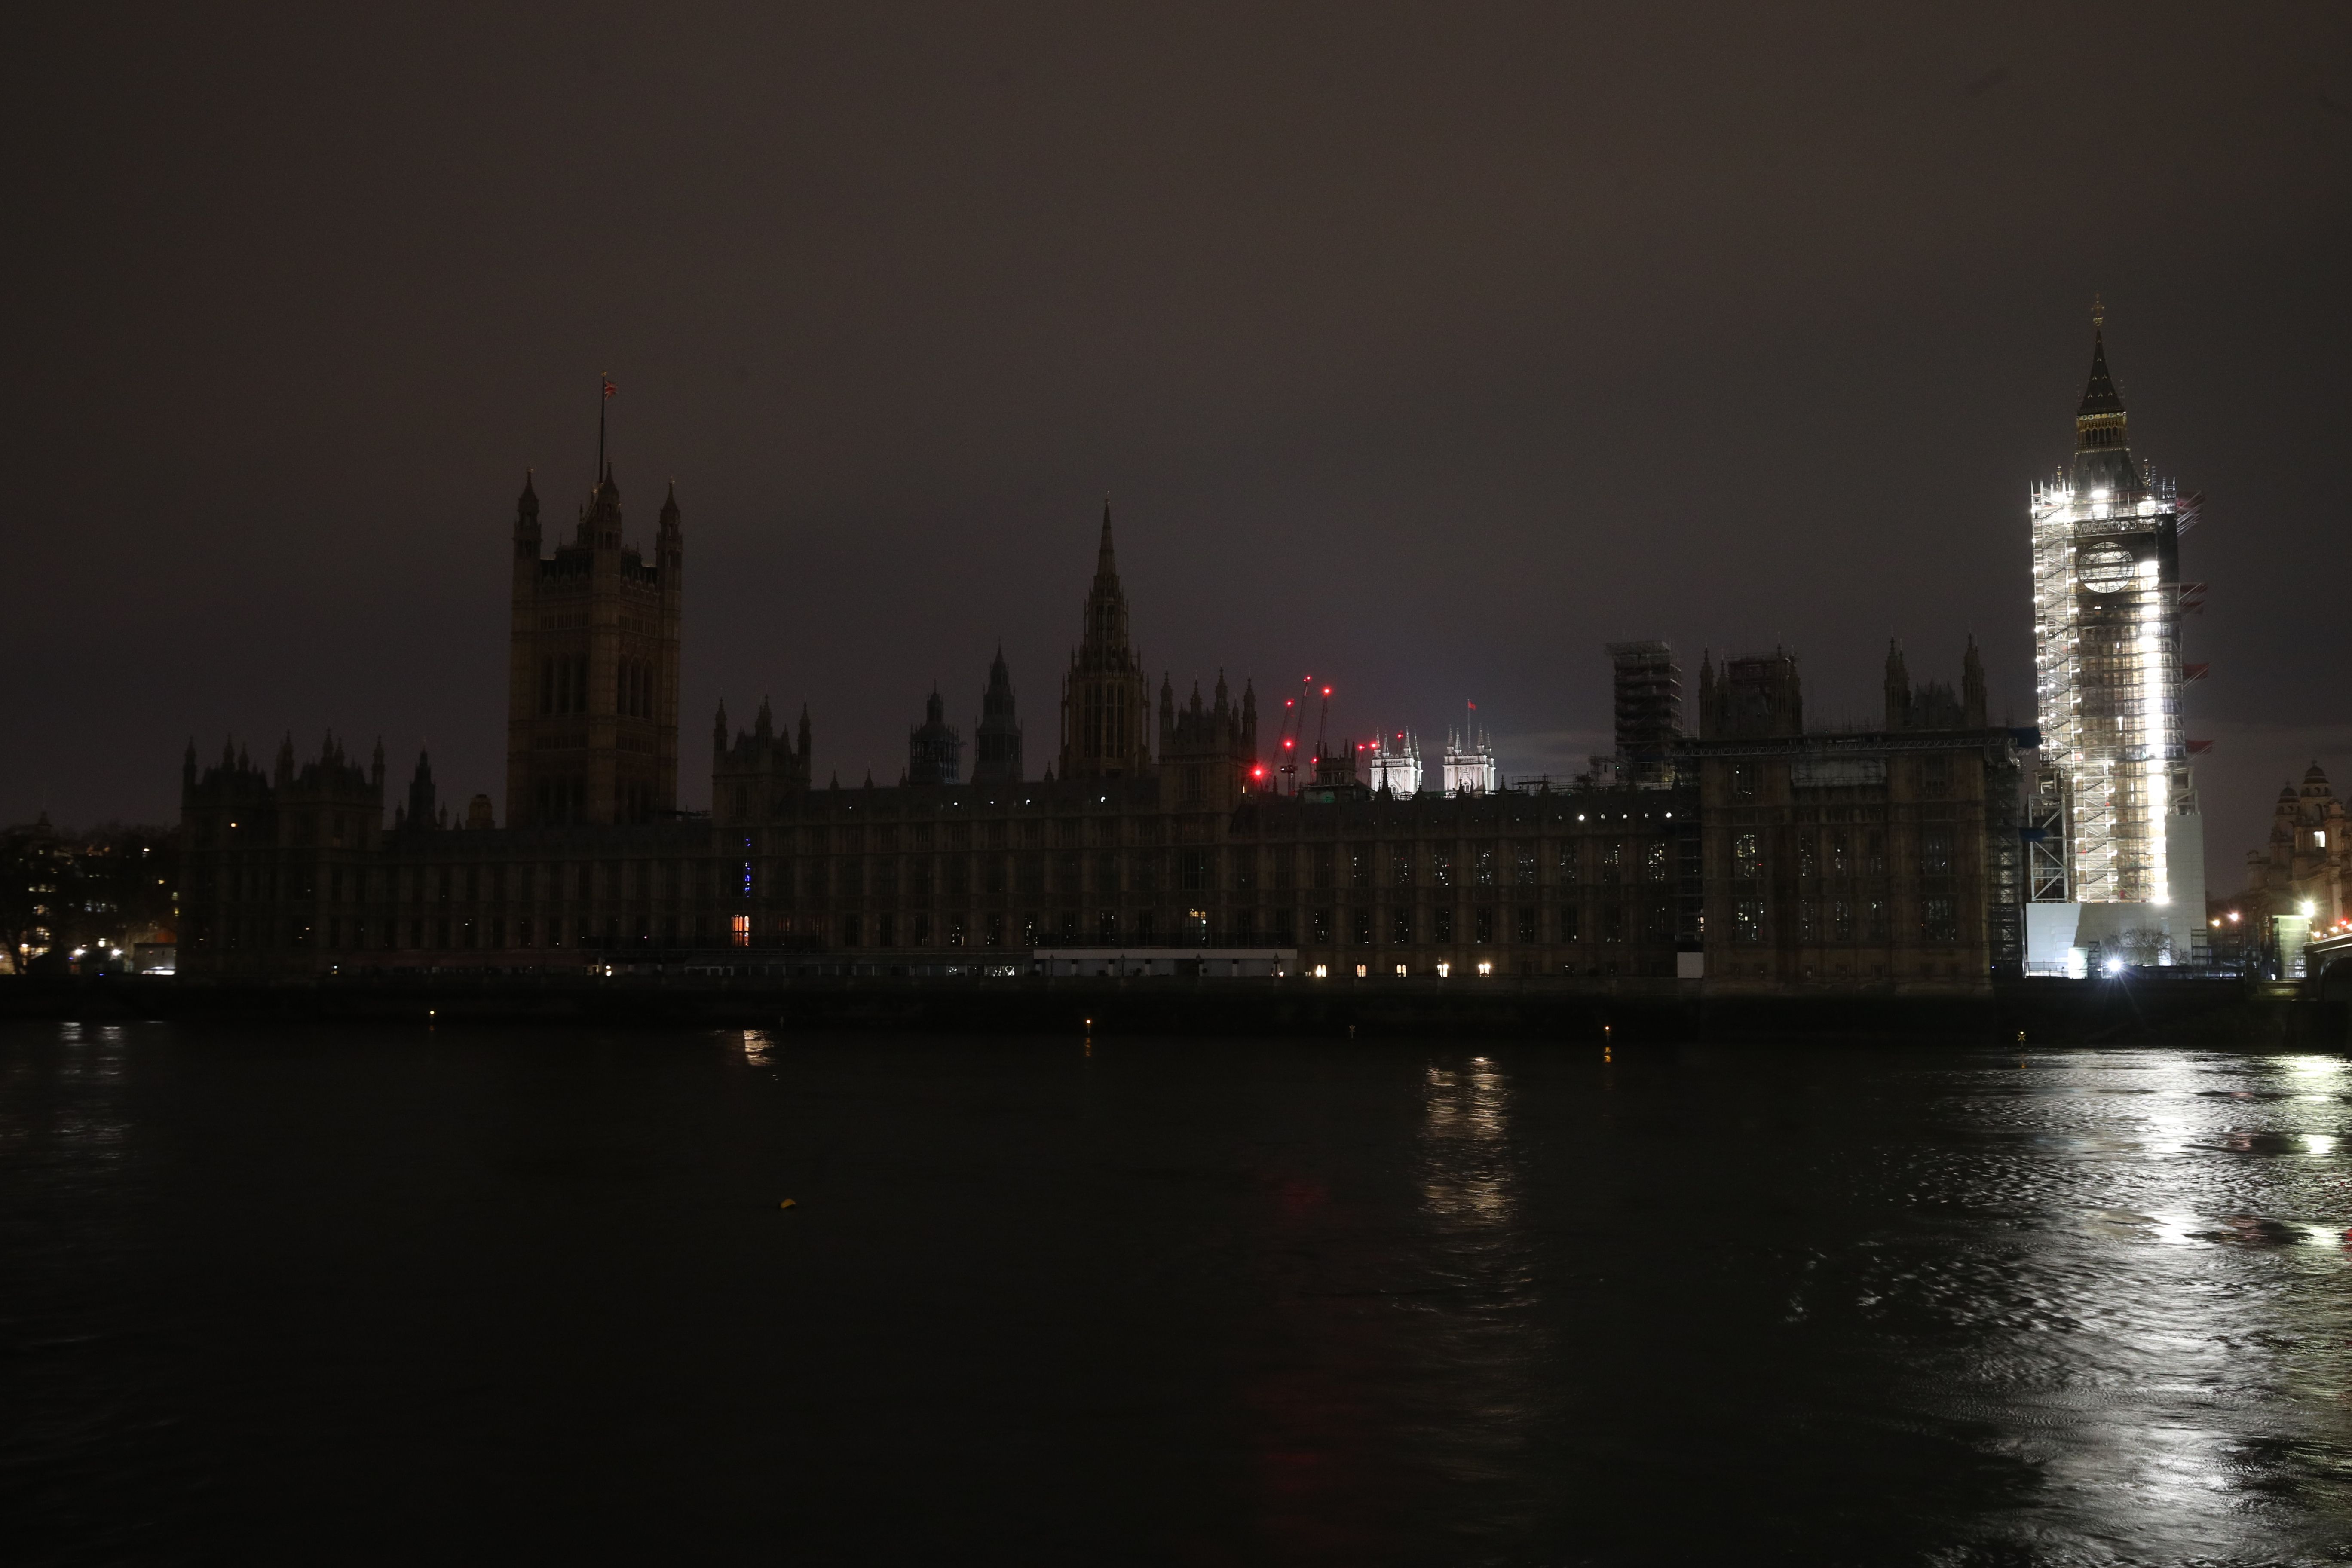 The Palace of Westminster in central London, which contains the House of Commons and House of Lords, takes part in Earth Hour